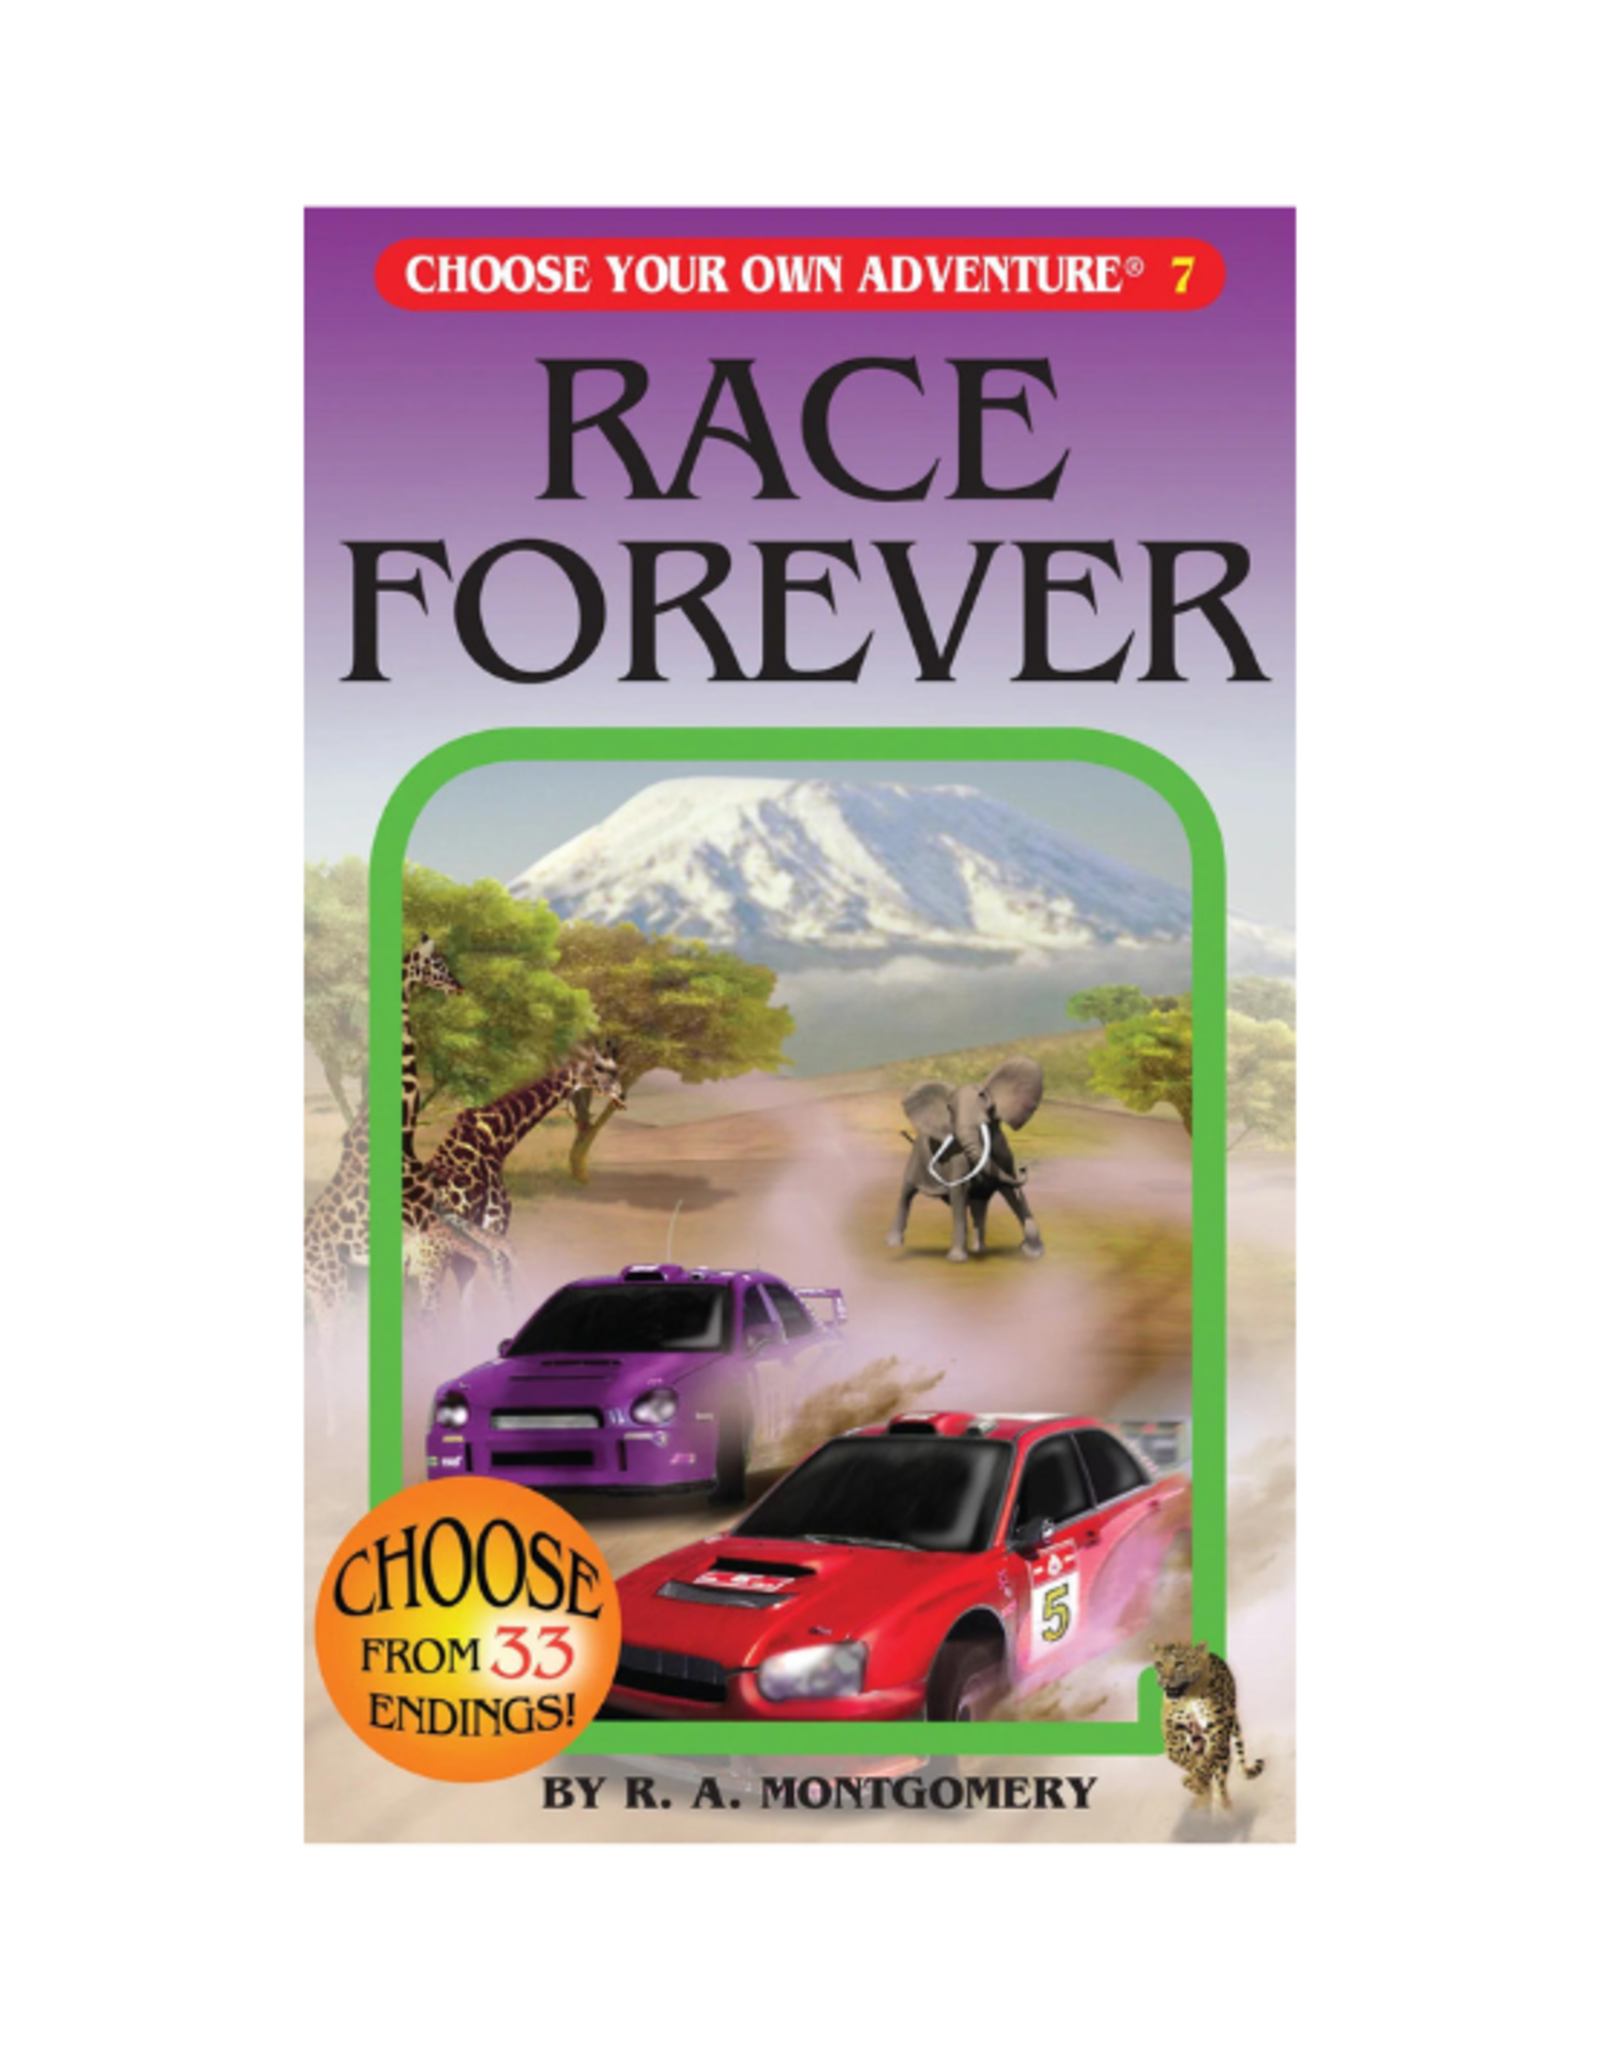 Choose Your Own Adventure Book - Choose Your Own Adventure - Race Forever